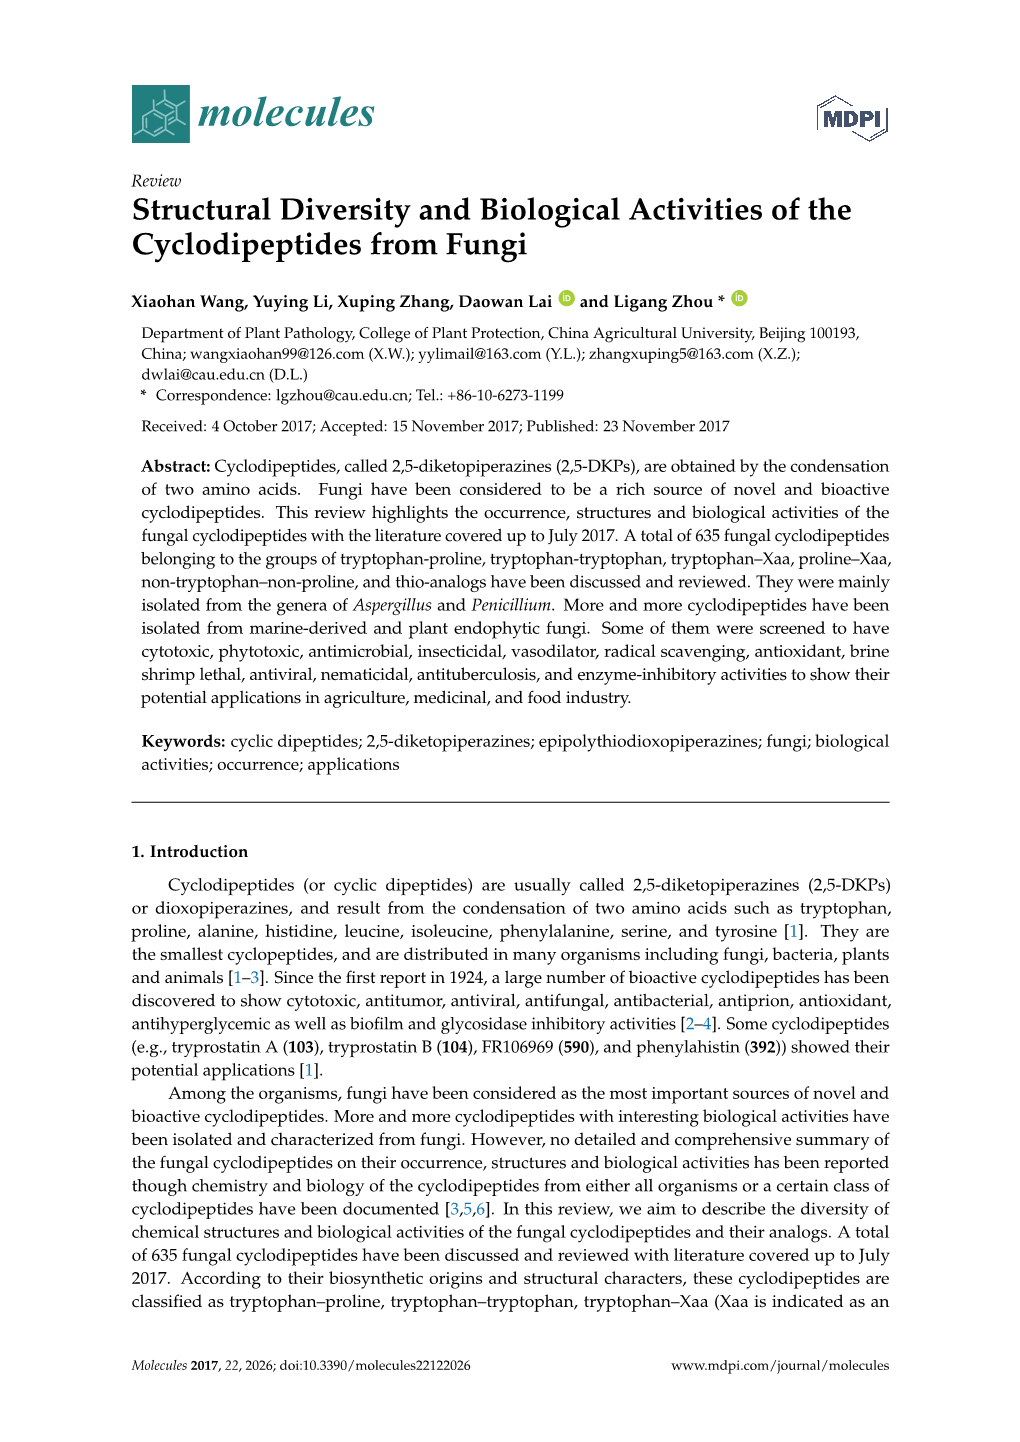 Structural Diversity and Biological Activities of the Cyclodipeptides from Fungi